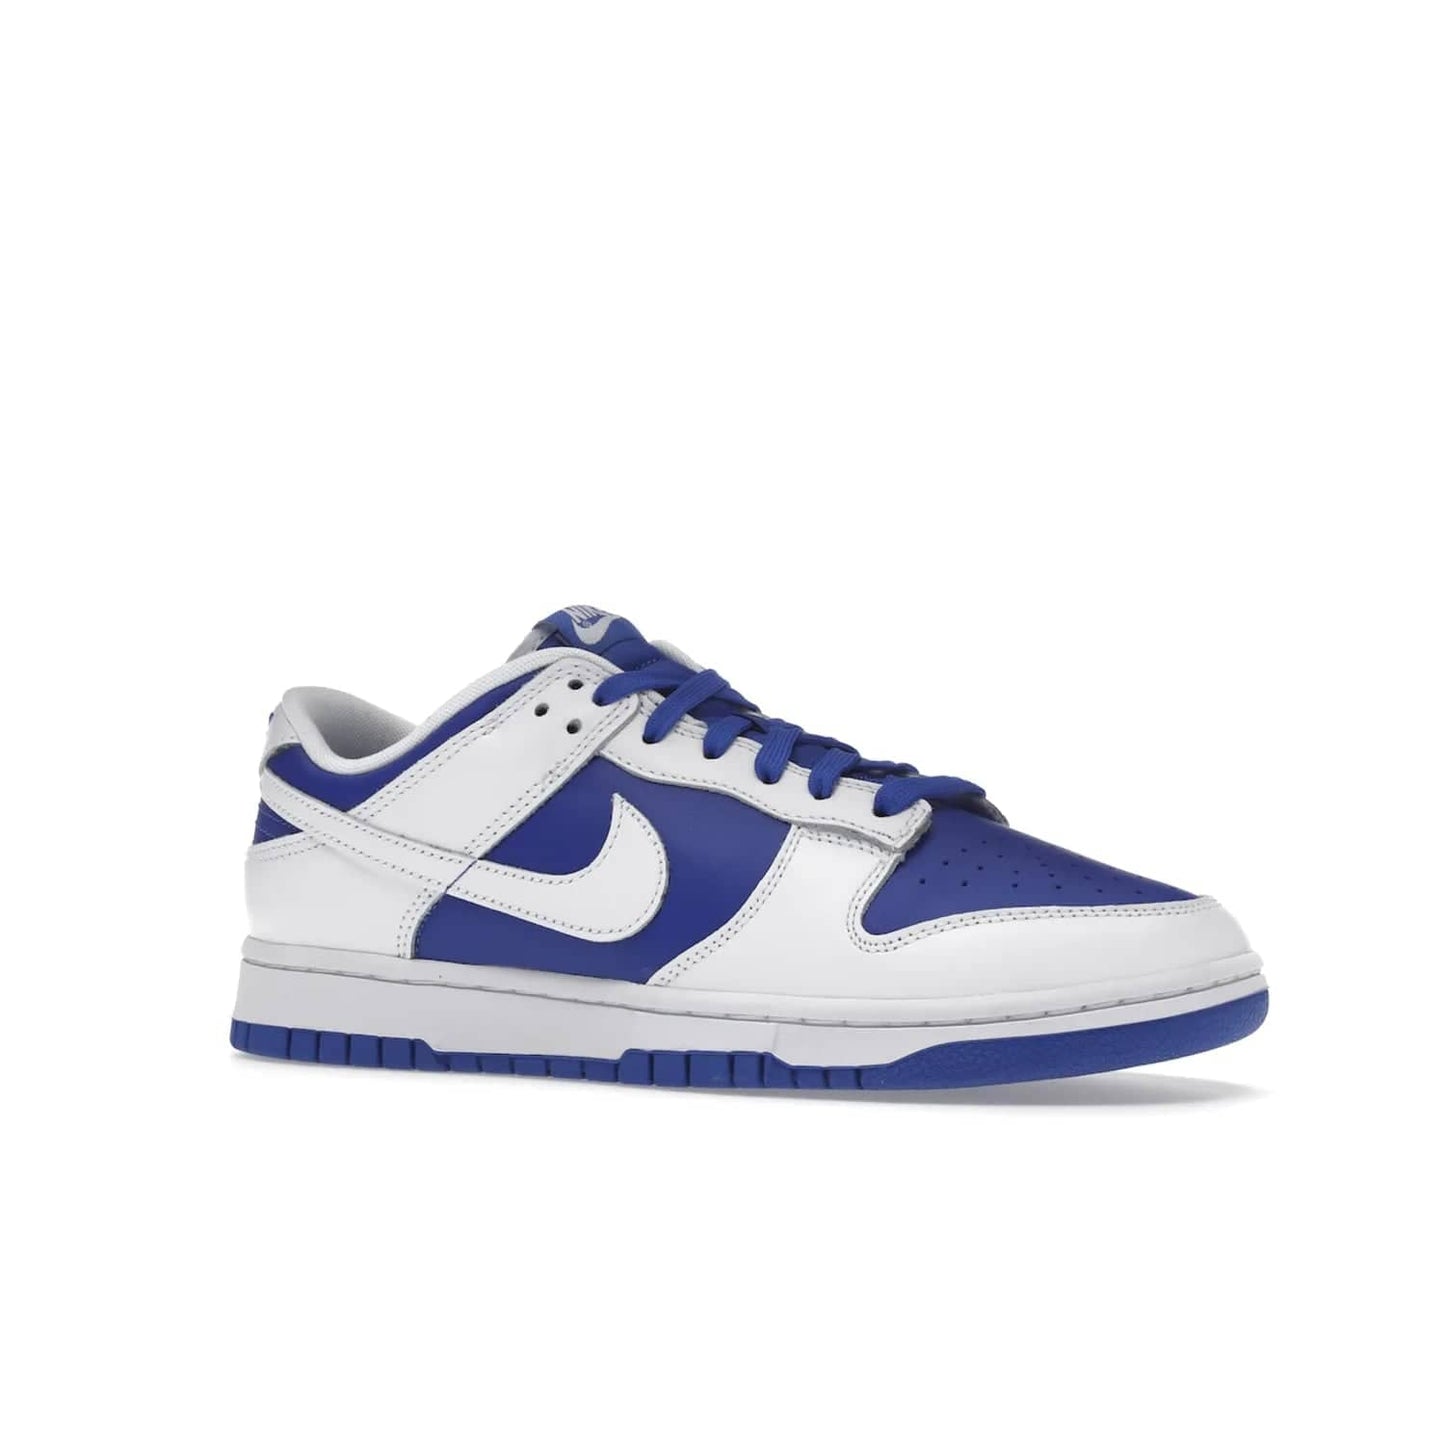 Nike Dunk Low Racer Blue White - Image 4 - Only at www.BallersClubKickz.com - Sleek Racer Blue leather upper and white leather overlays make up the Nike Dunk Low Racer Blue White. Woven tag and heel embroidery for a 1985 Dunk look with a matching EVA foam sole completes the classic colorway.